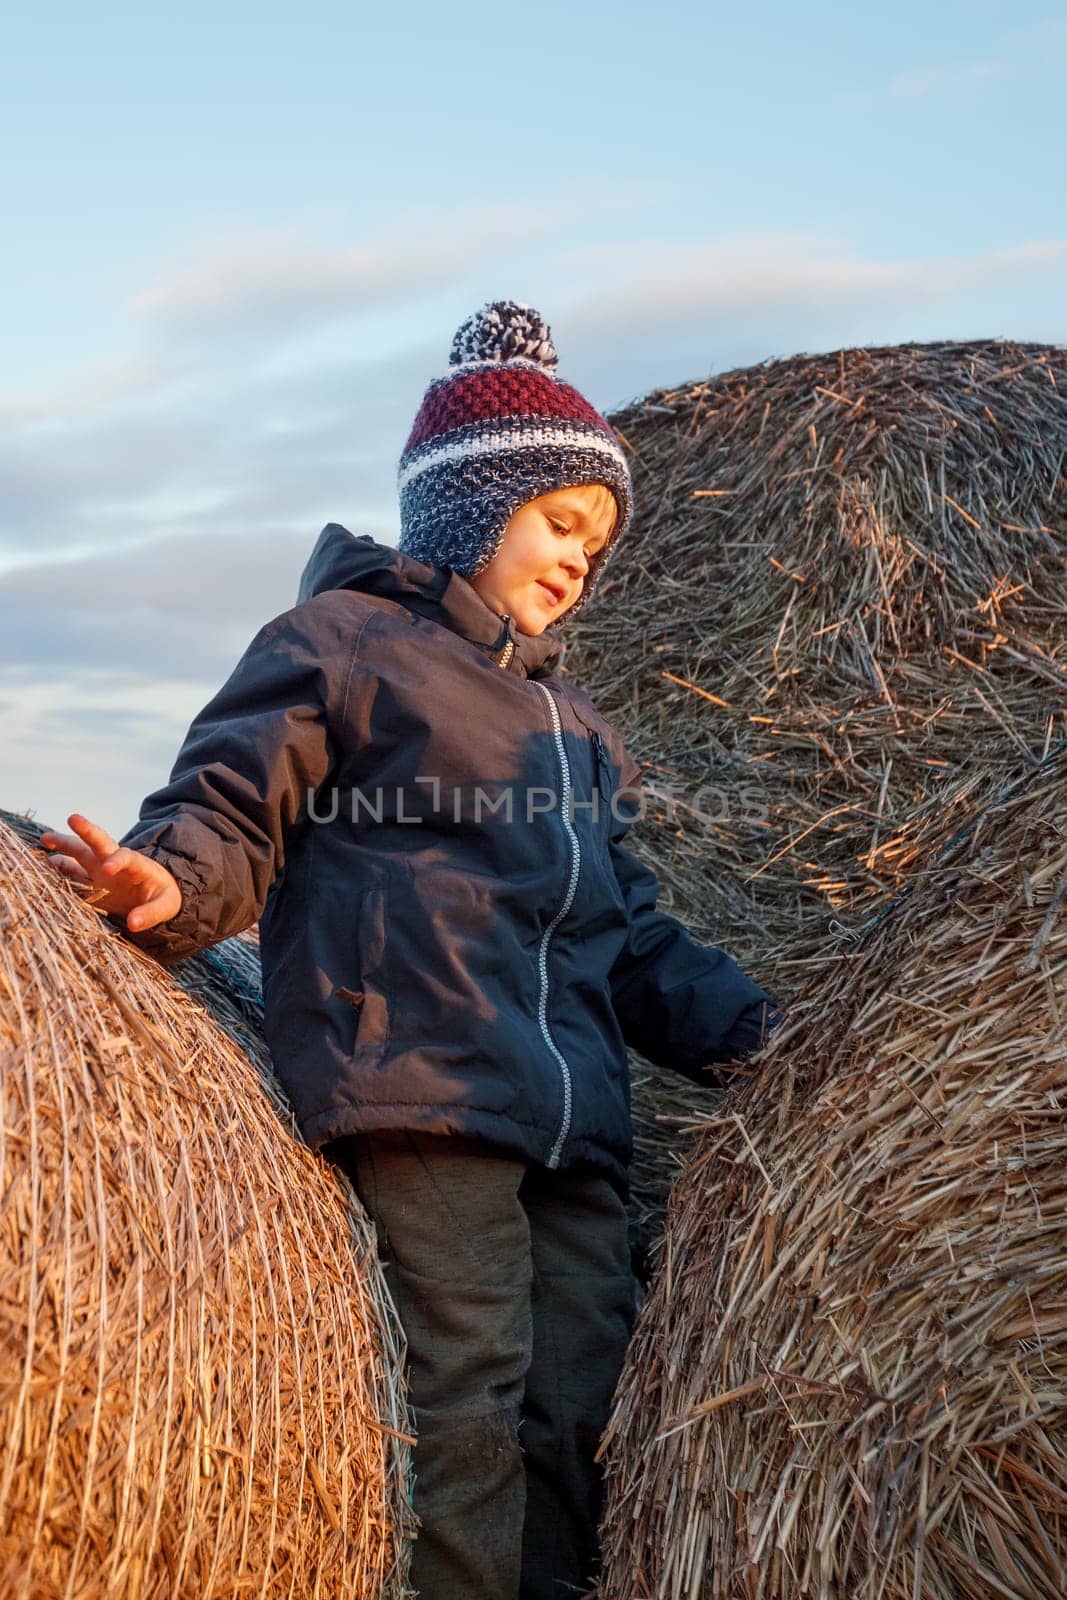 A cute boy poses on top of a pile of straw bales, sunset lights, a background of blue sky by Lincikas